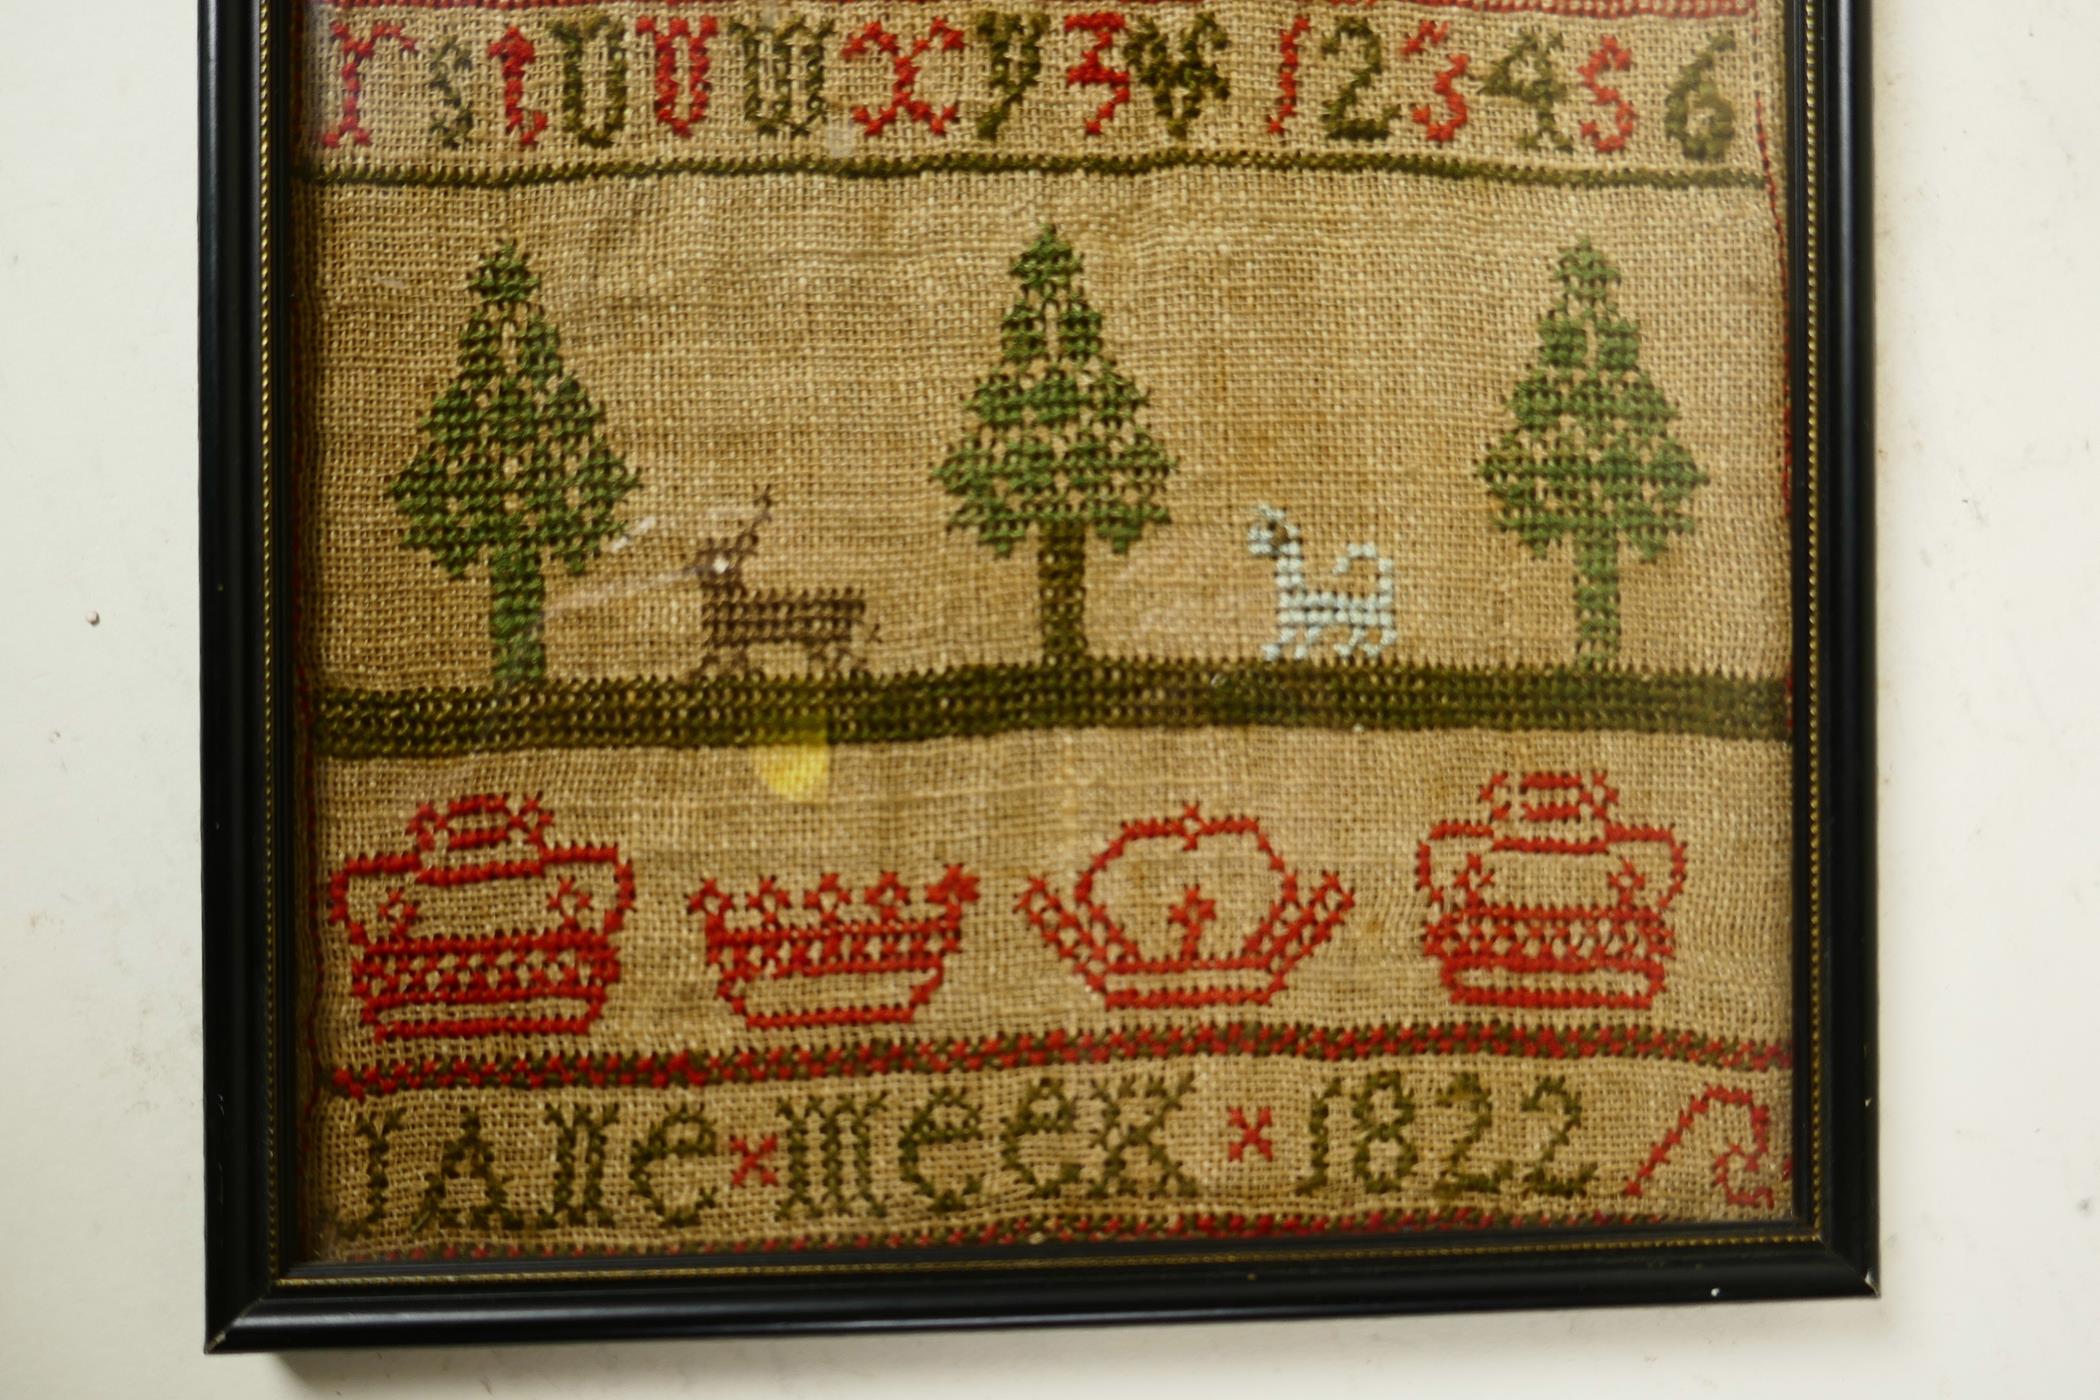 An early C19th hand stitched sampler in cross stitch by 'Jane Meek - 1822' (sister of Janet Meek), - Image 3 of 7